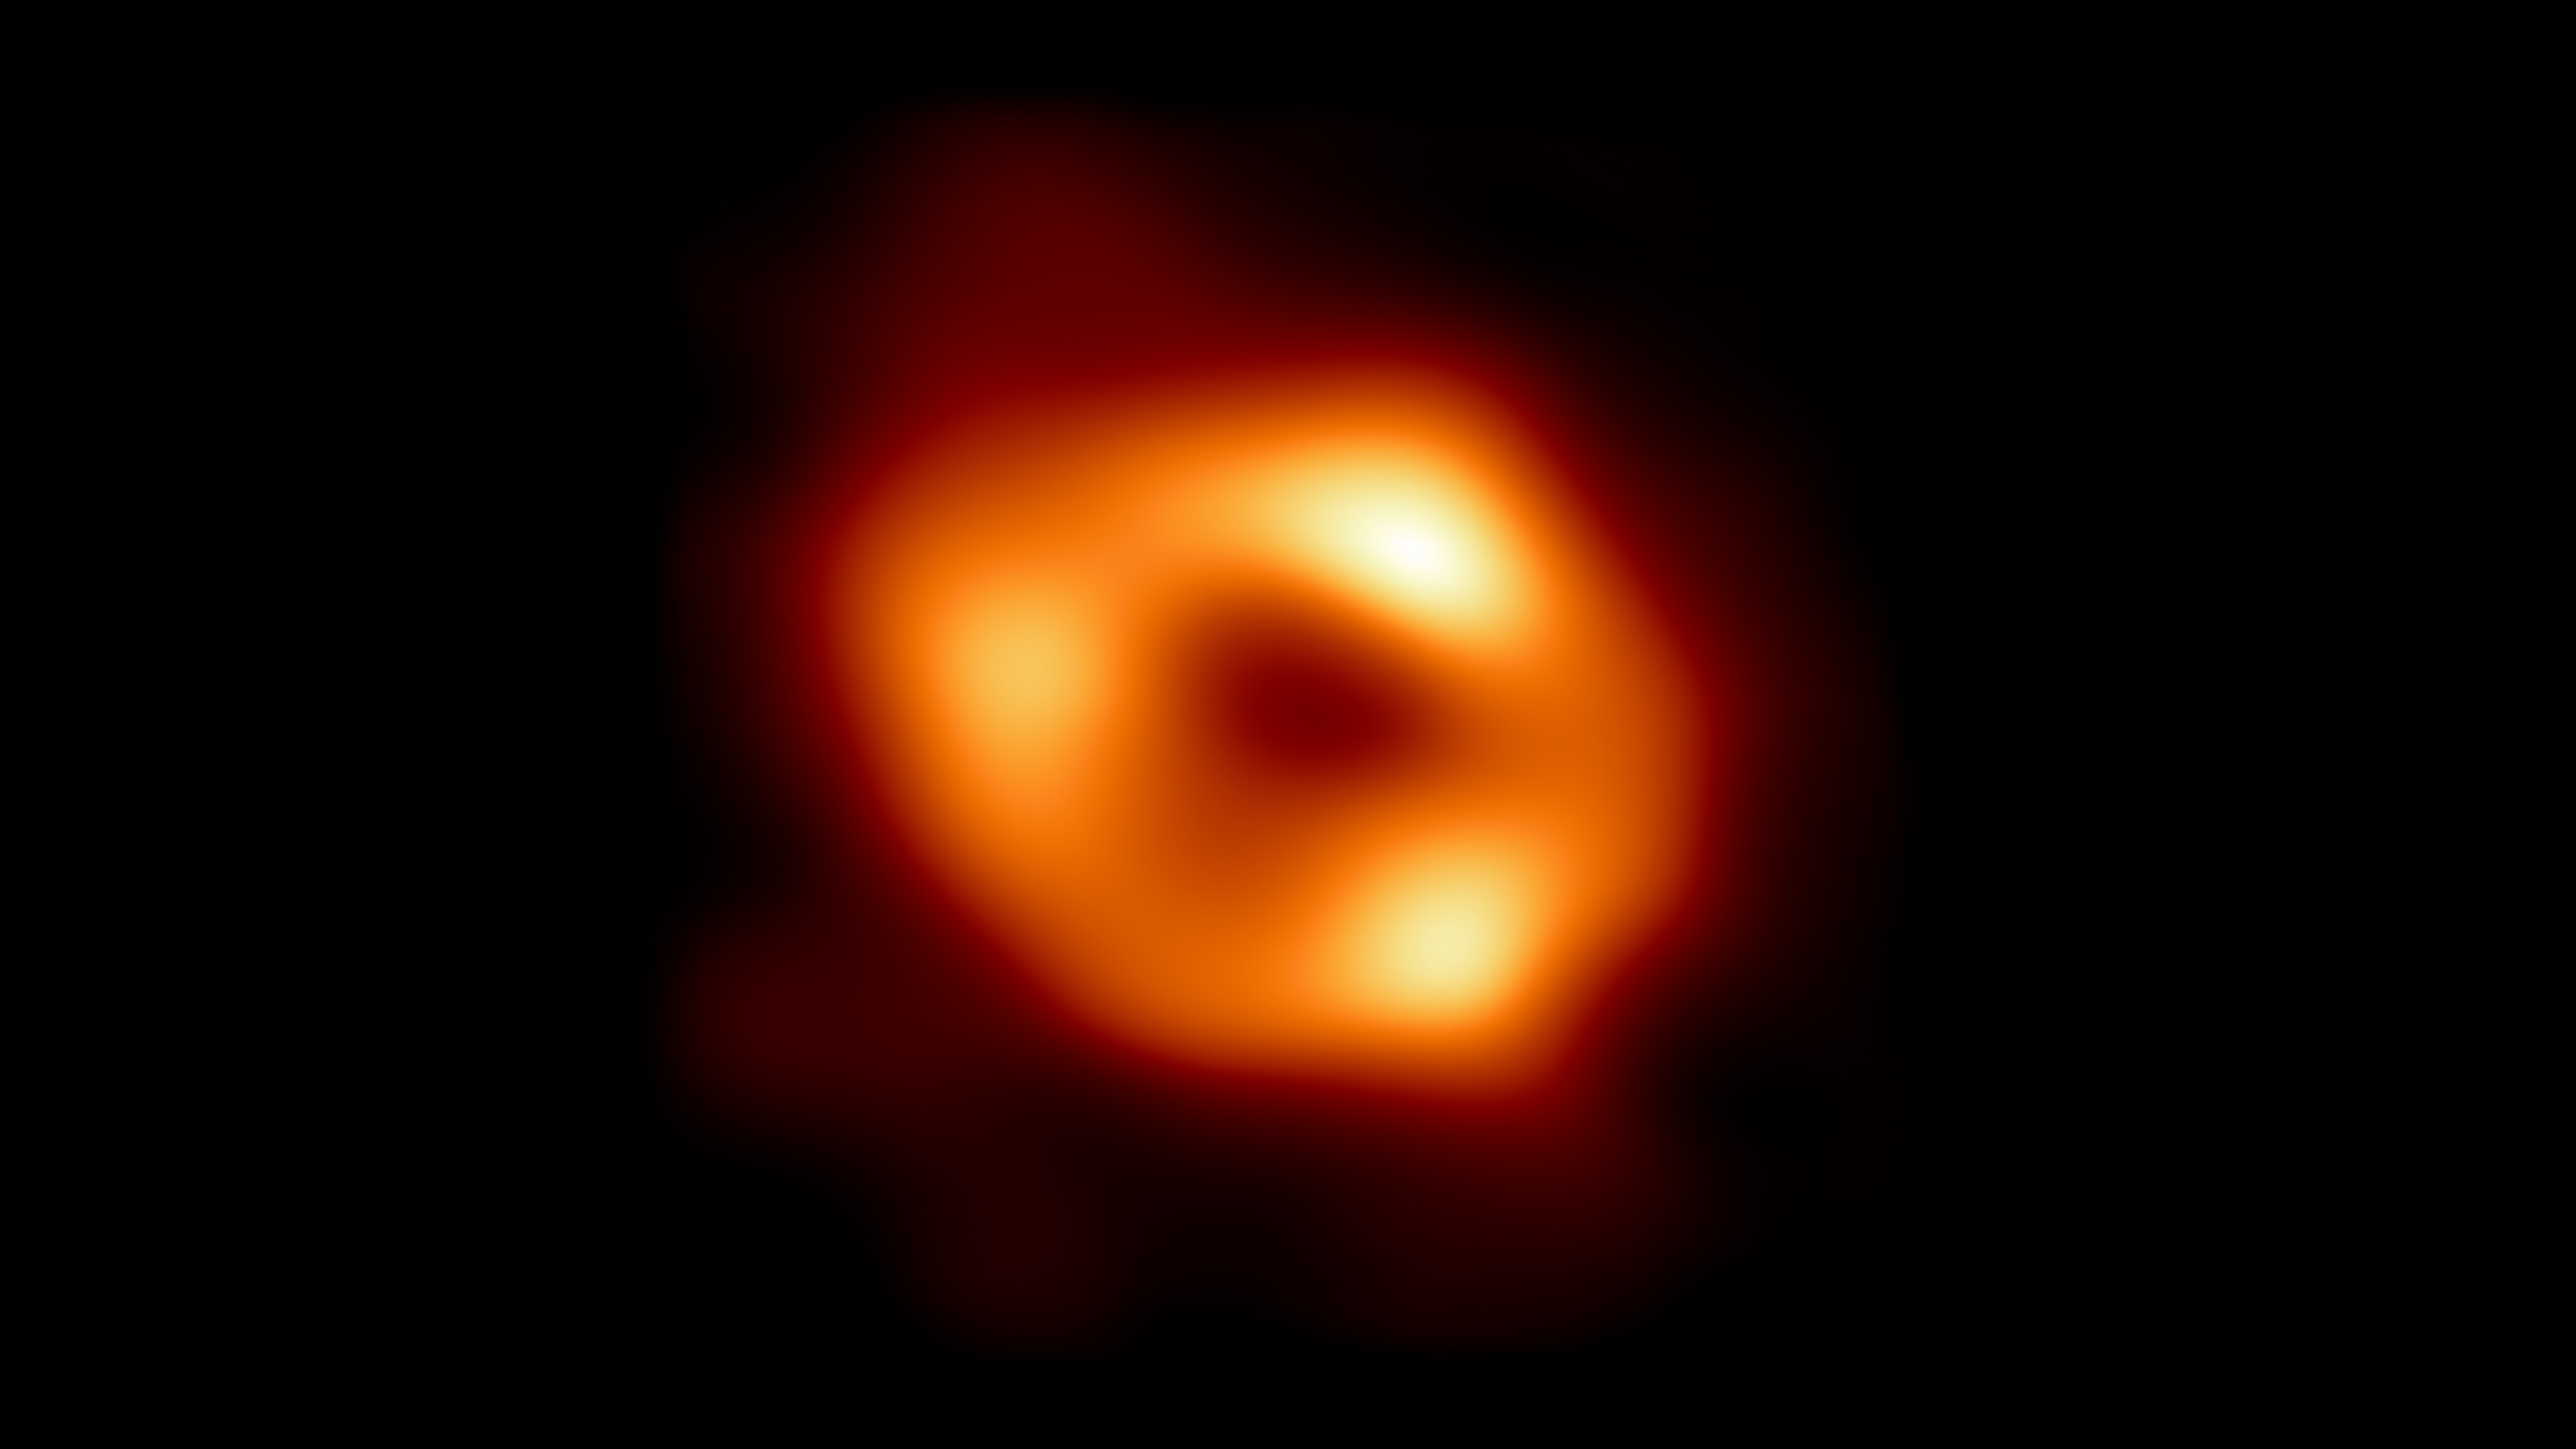 An image of the supermassive black hole at the center of the Milky Way, a giant named Sagittarius A*, revealed by the Event Horizon Telescope on May 12, 2022.